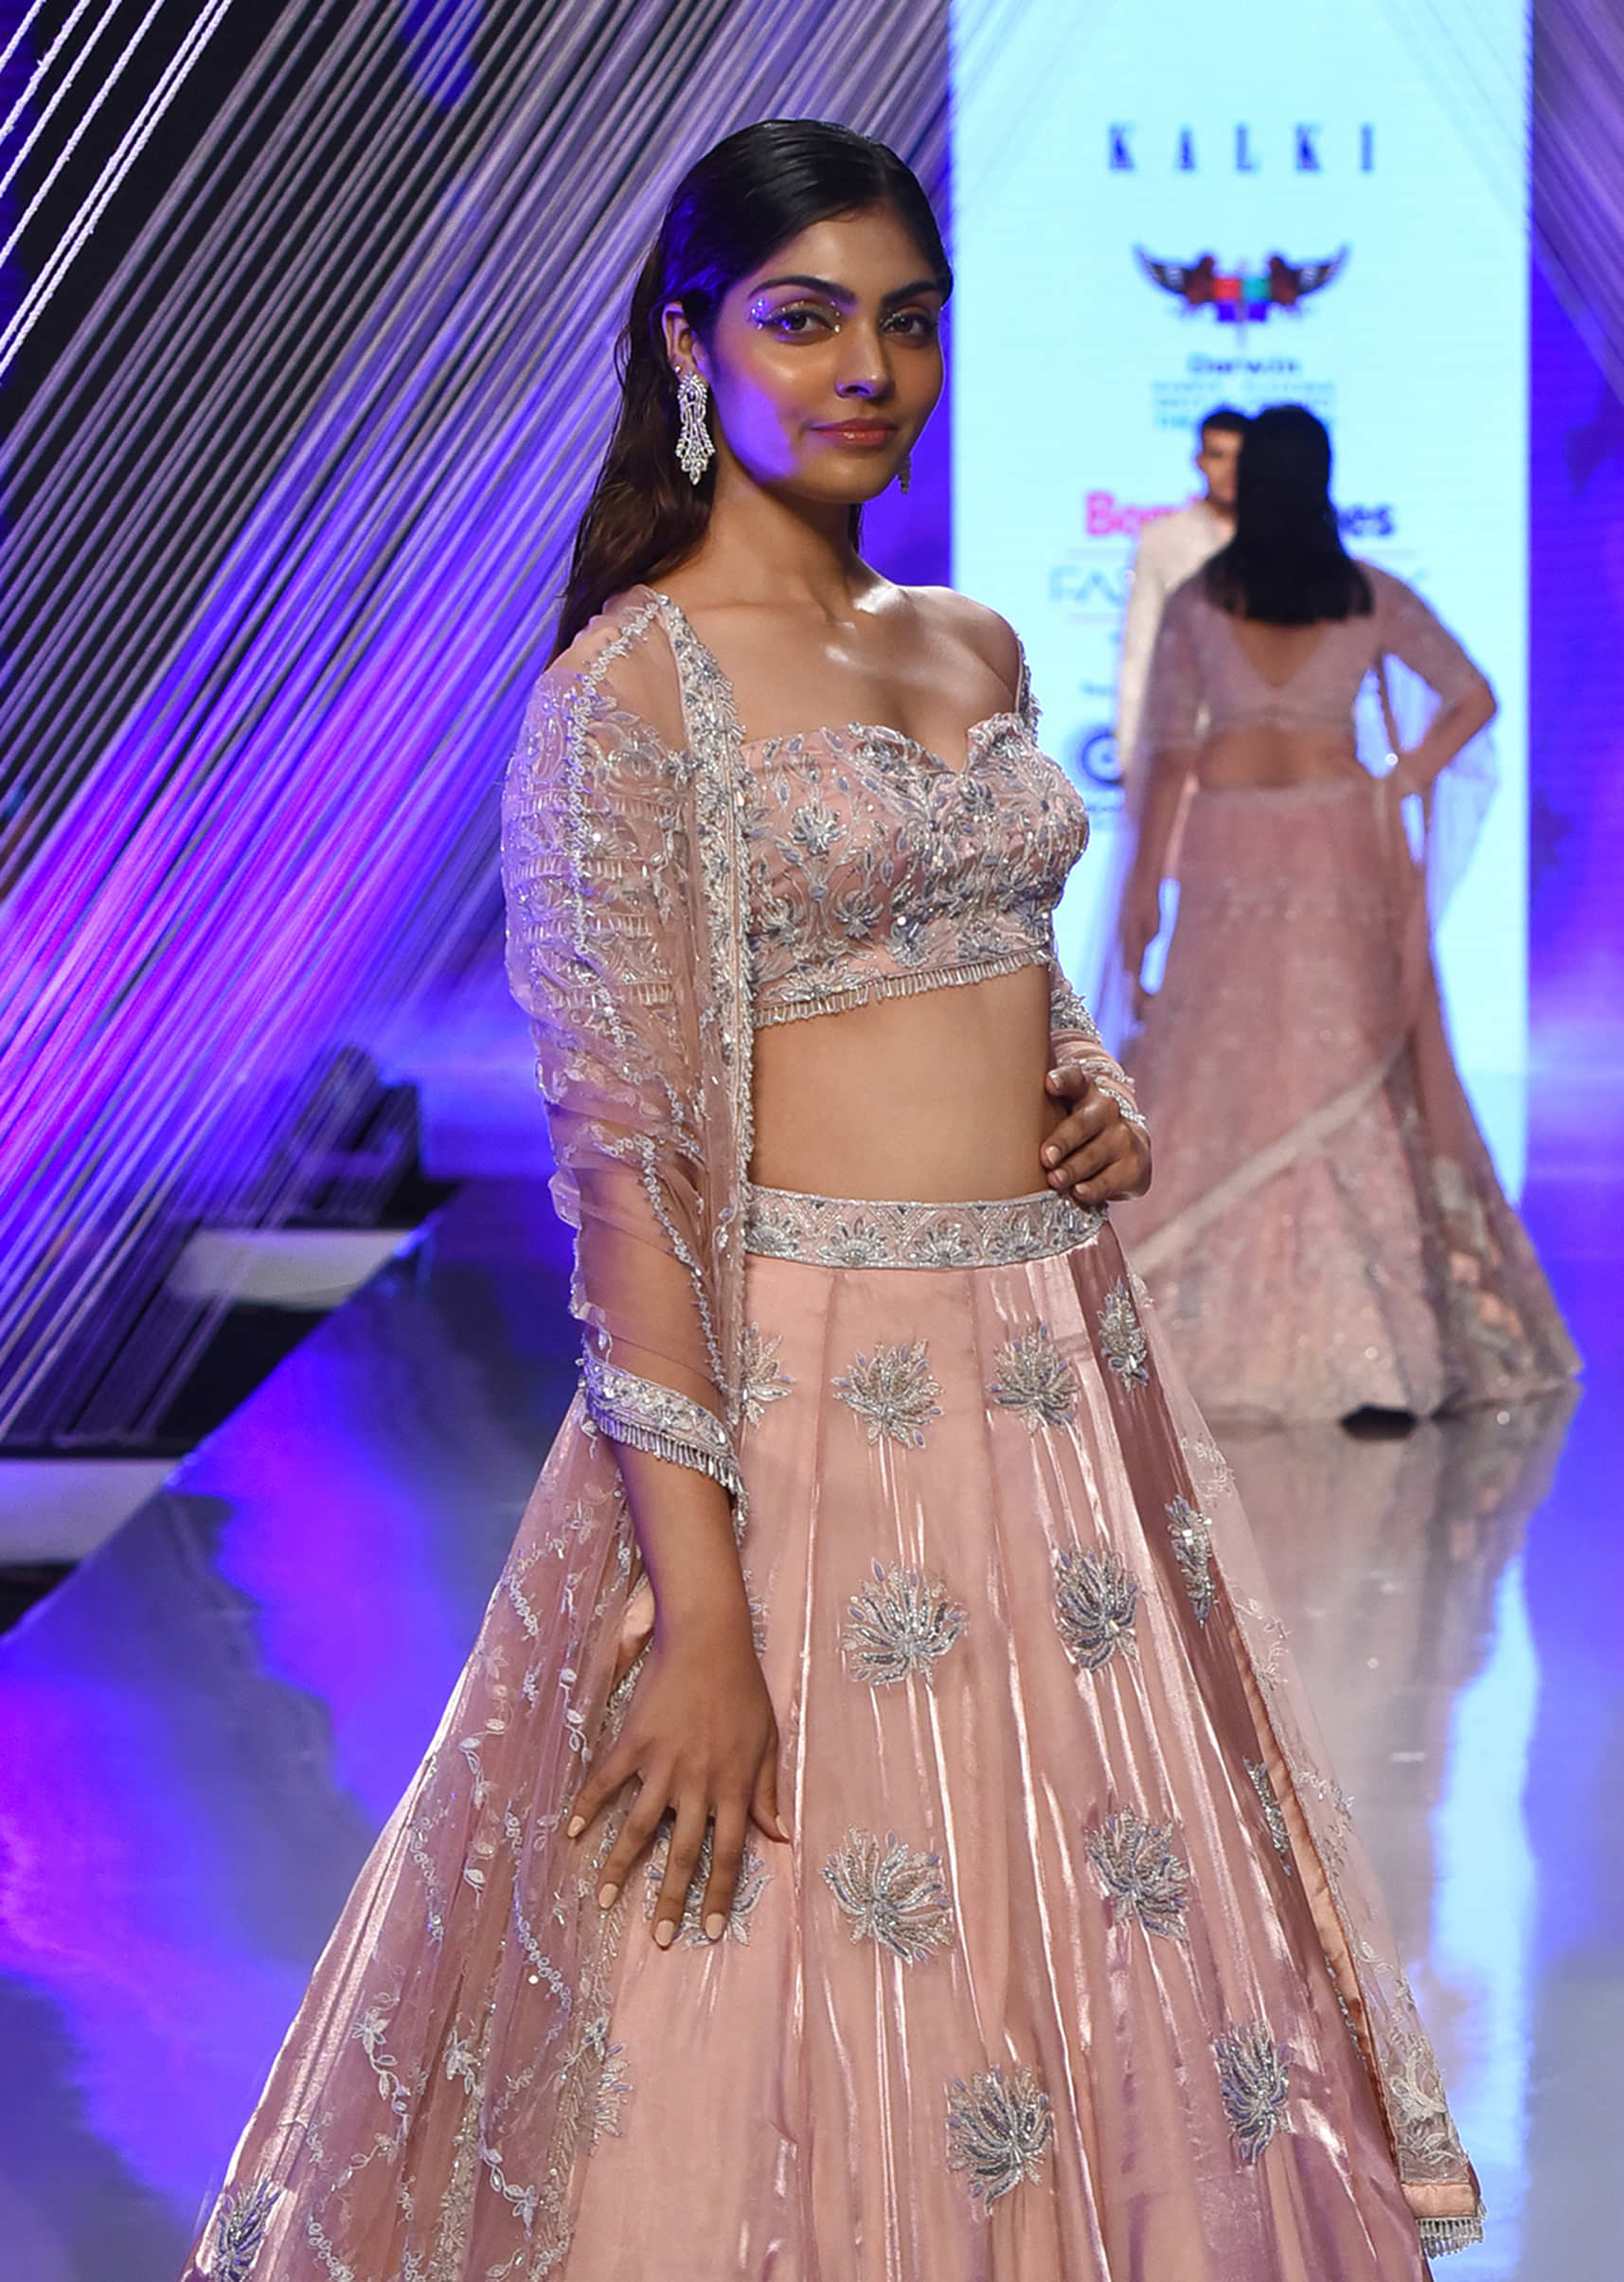 Evable - Introducing The Show-Off-Shoulder Lehenga 💗 from the “Lovestruck”  Collection. An Off-Shoulder gathered blouse with hand touched sequins  attached on a tube top with side opening. A Big Cinderella Hot Pink